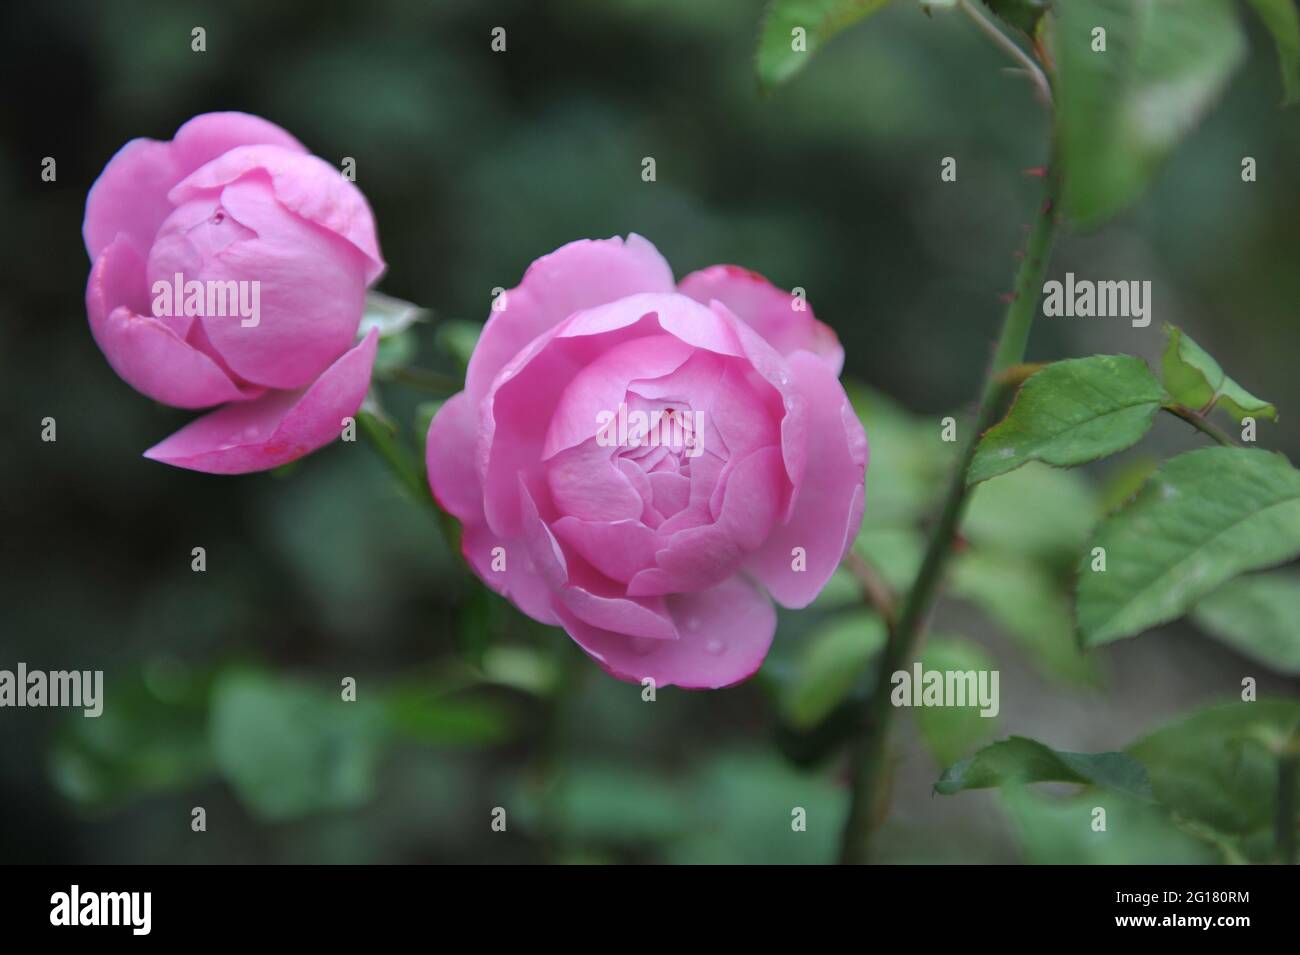 Lilac-pink English shrub rose (Rosa) Charles Rennie Mackintosh blooms in a garden in October Stock Photo